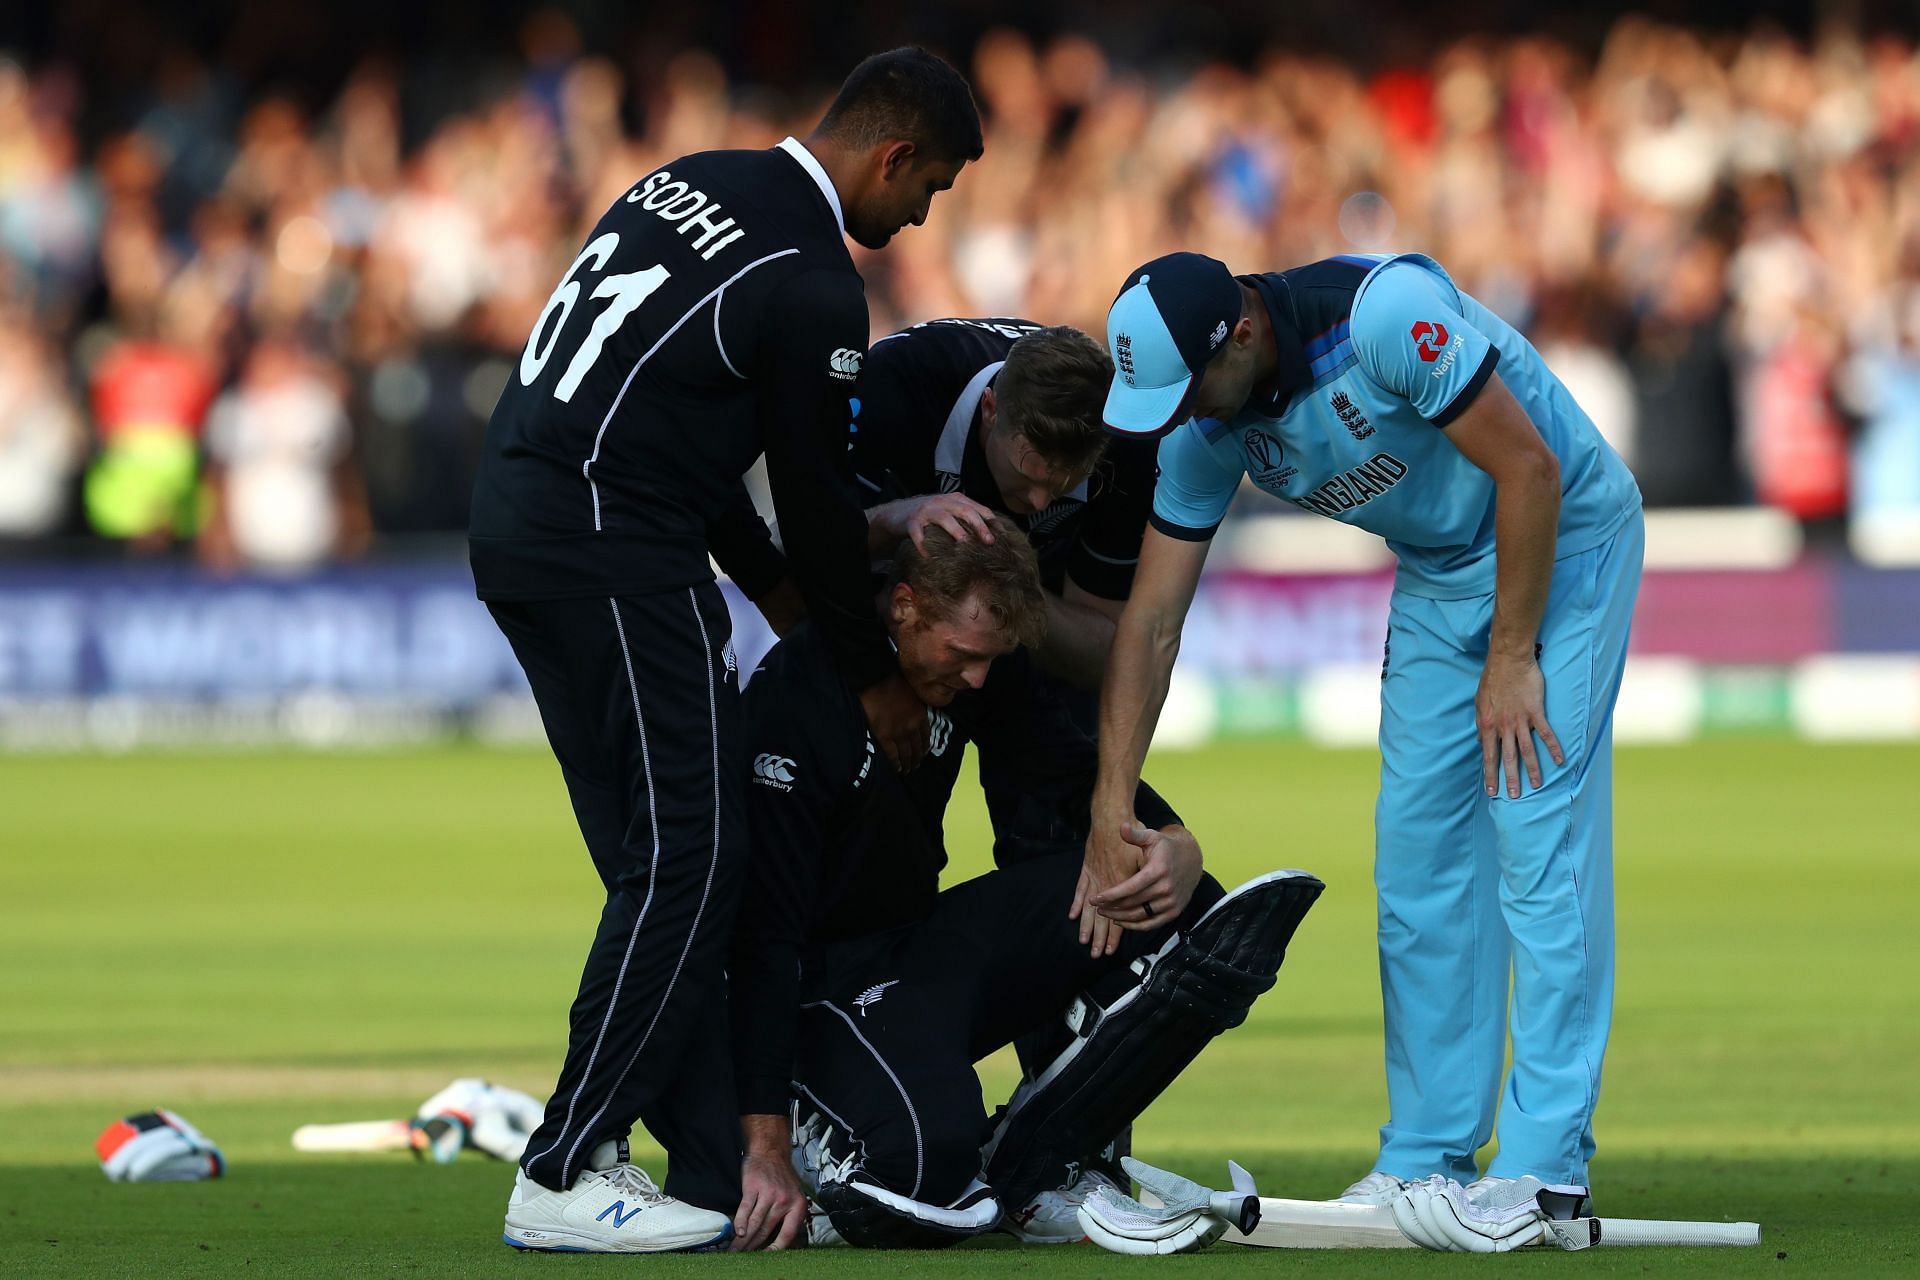 Martin Guptill is crestfallen after being run out in the final. (Credits:Getty)